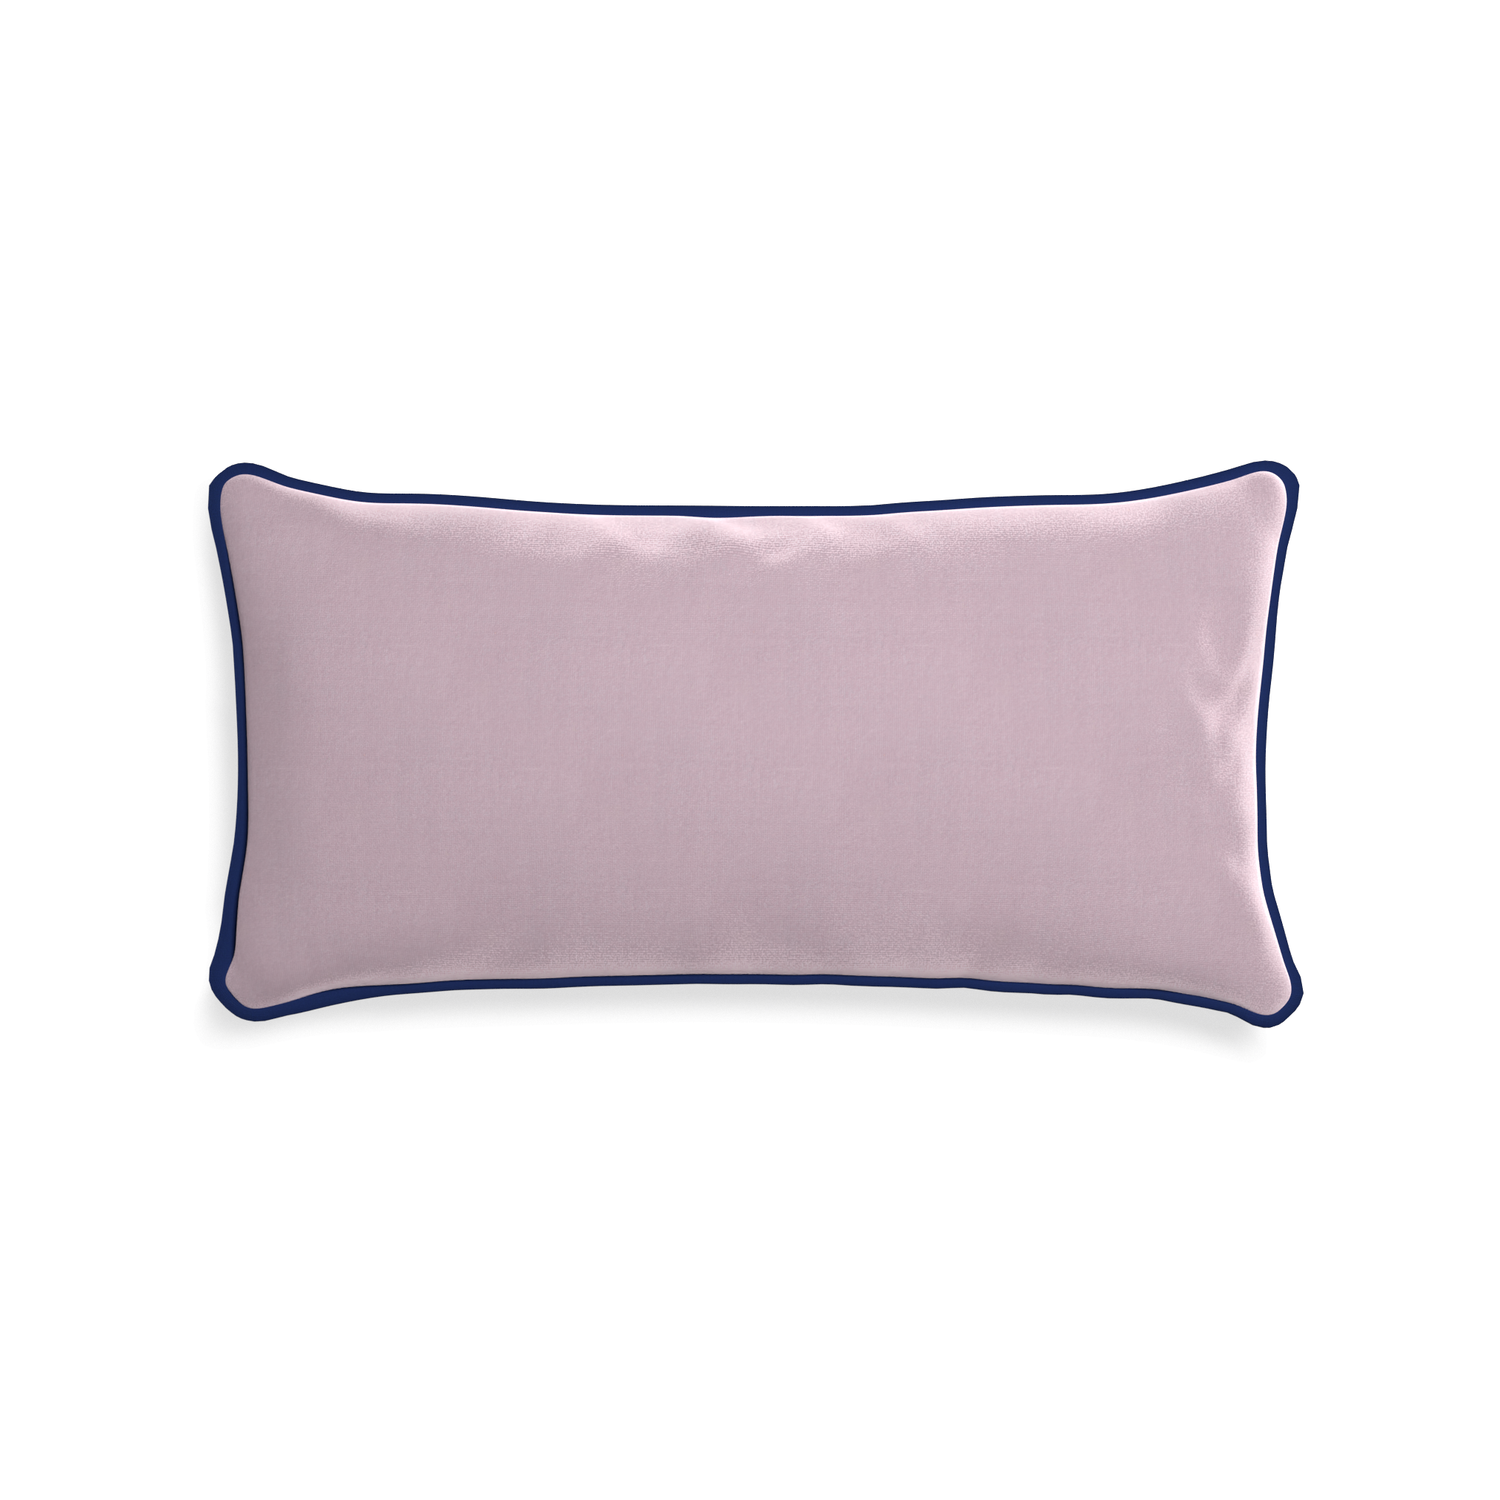 Midi-lumbar lilac velvet custom lilacpillow with midnight piping on white background